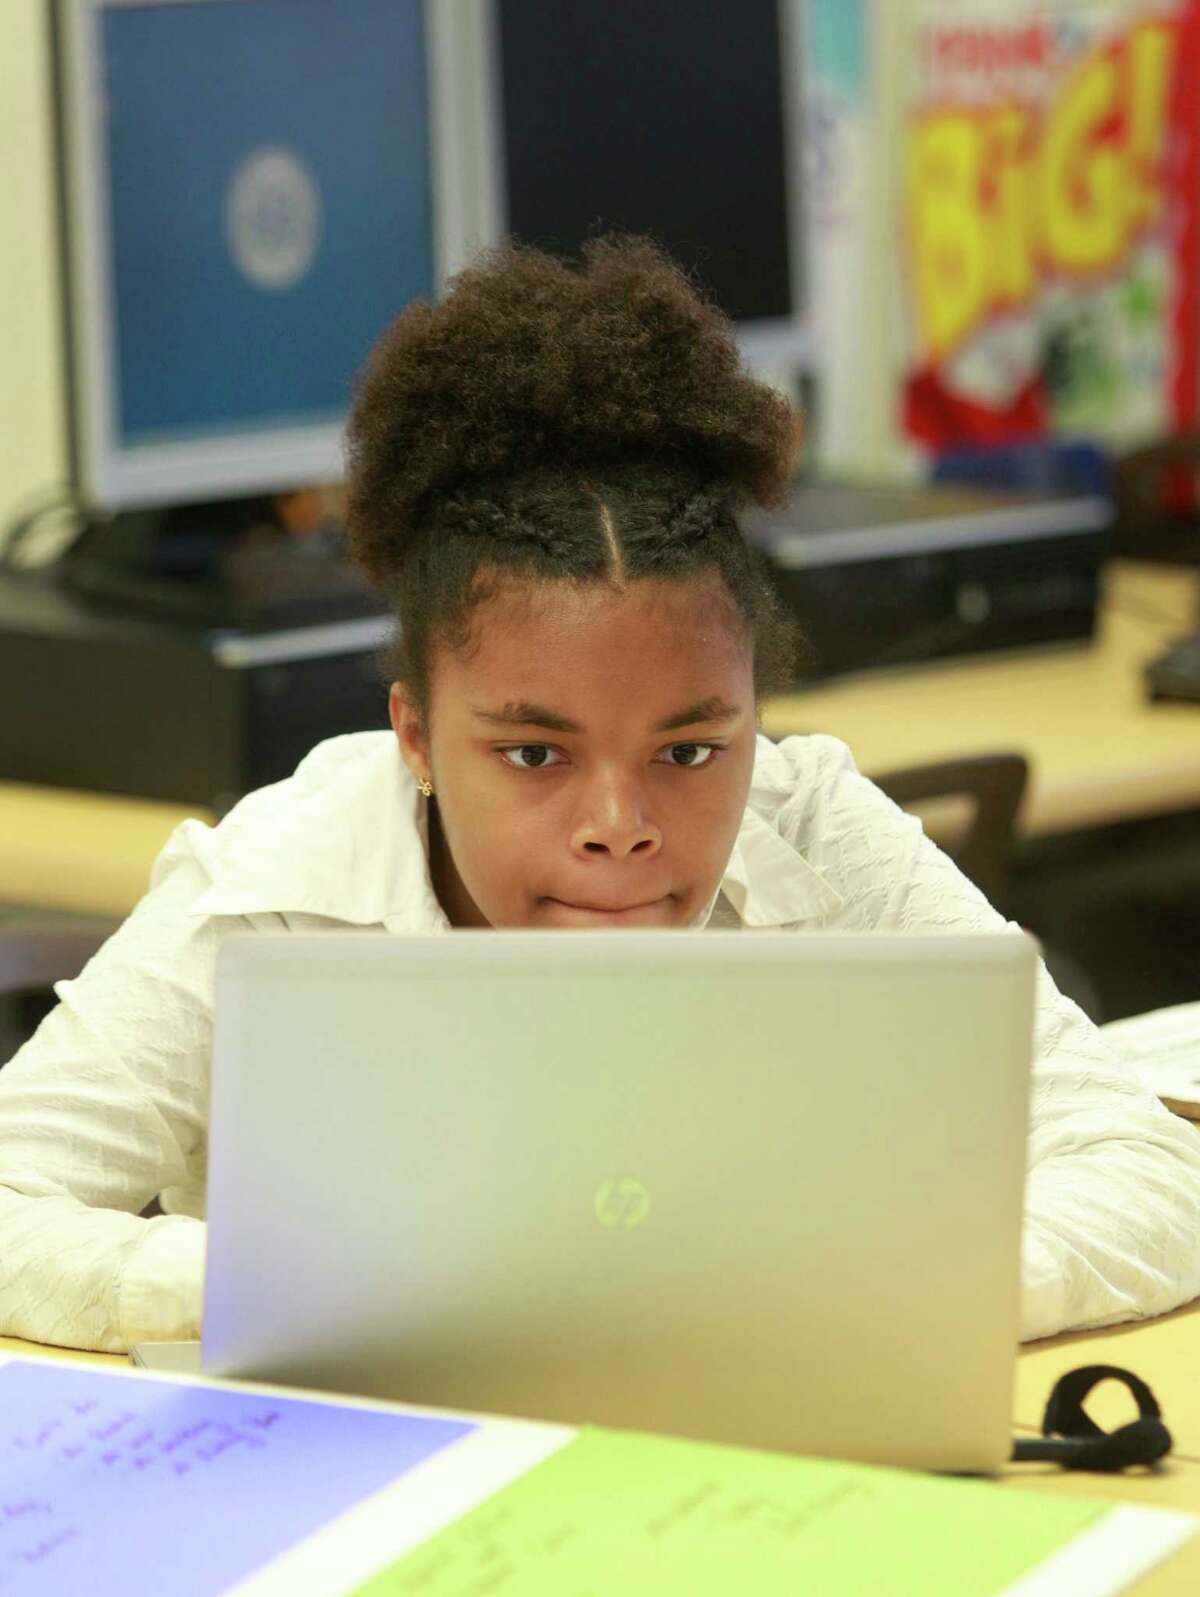 Jasmin Jarmon, 14, work on a project at the Energy Institute High School, 812 W. 28th St., Thursday, Feb. 20, 2014, in Houston. ( Melissa Phillip / Houston Chronicle )